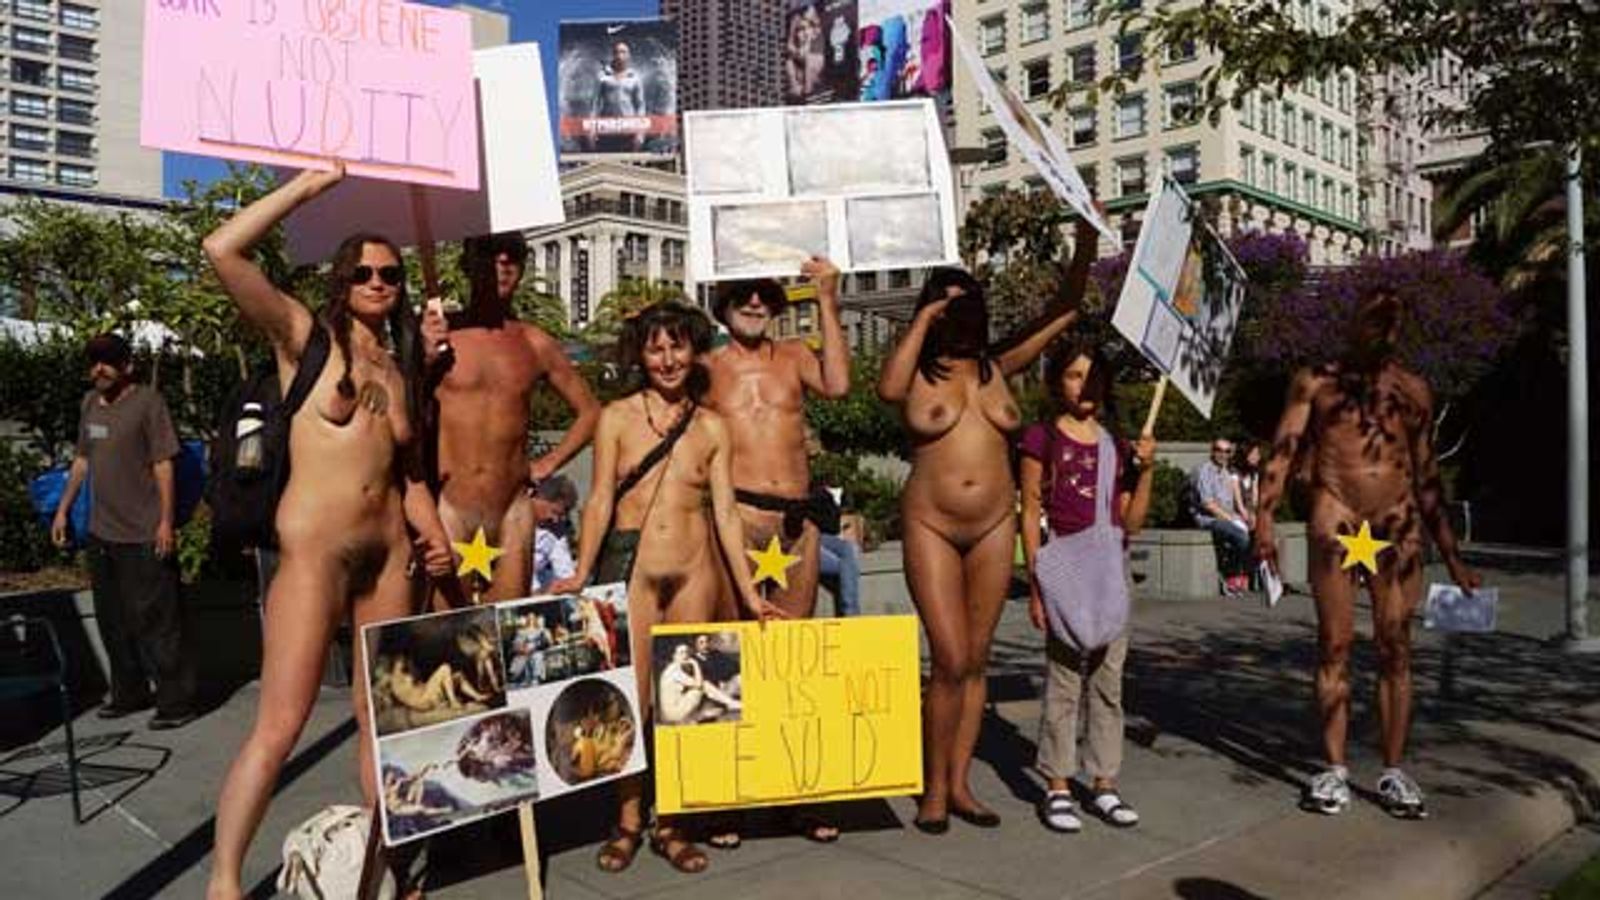 Nudists To Protest Nudity Ban, Wiener at City Hall Jan. 8-UPDATED